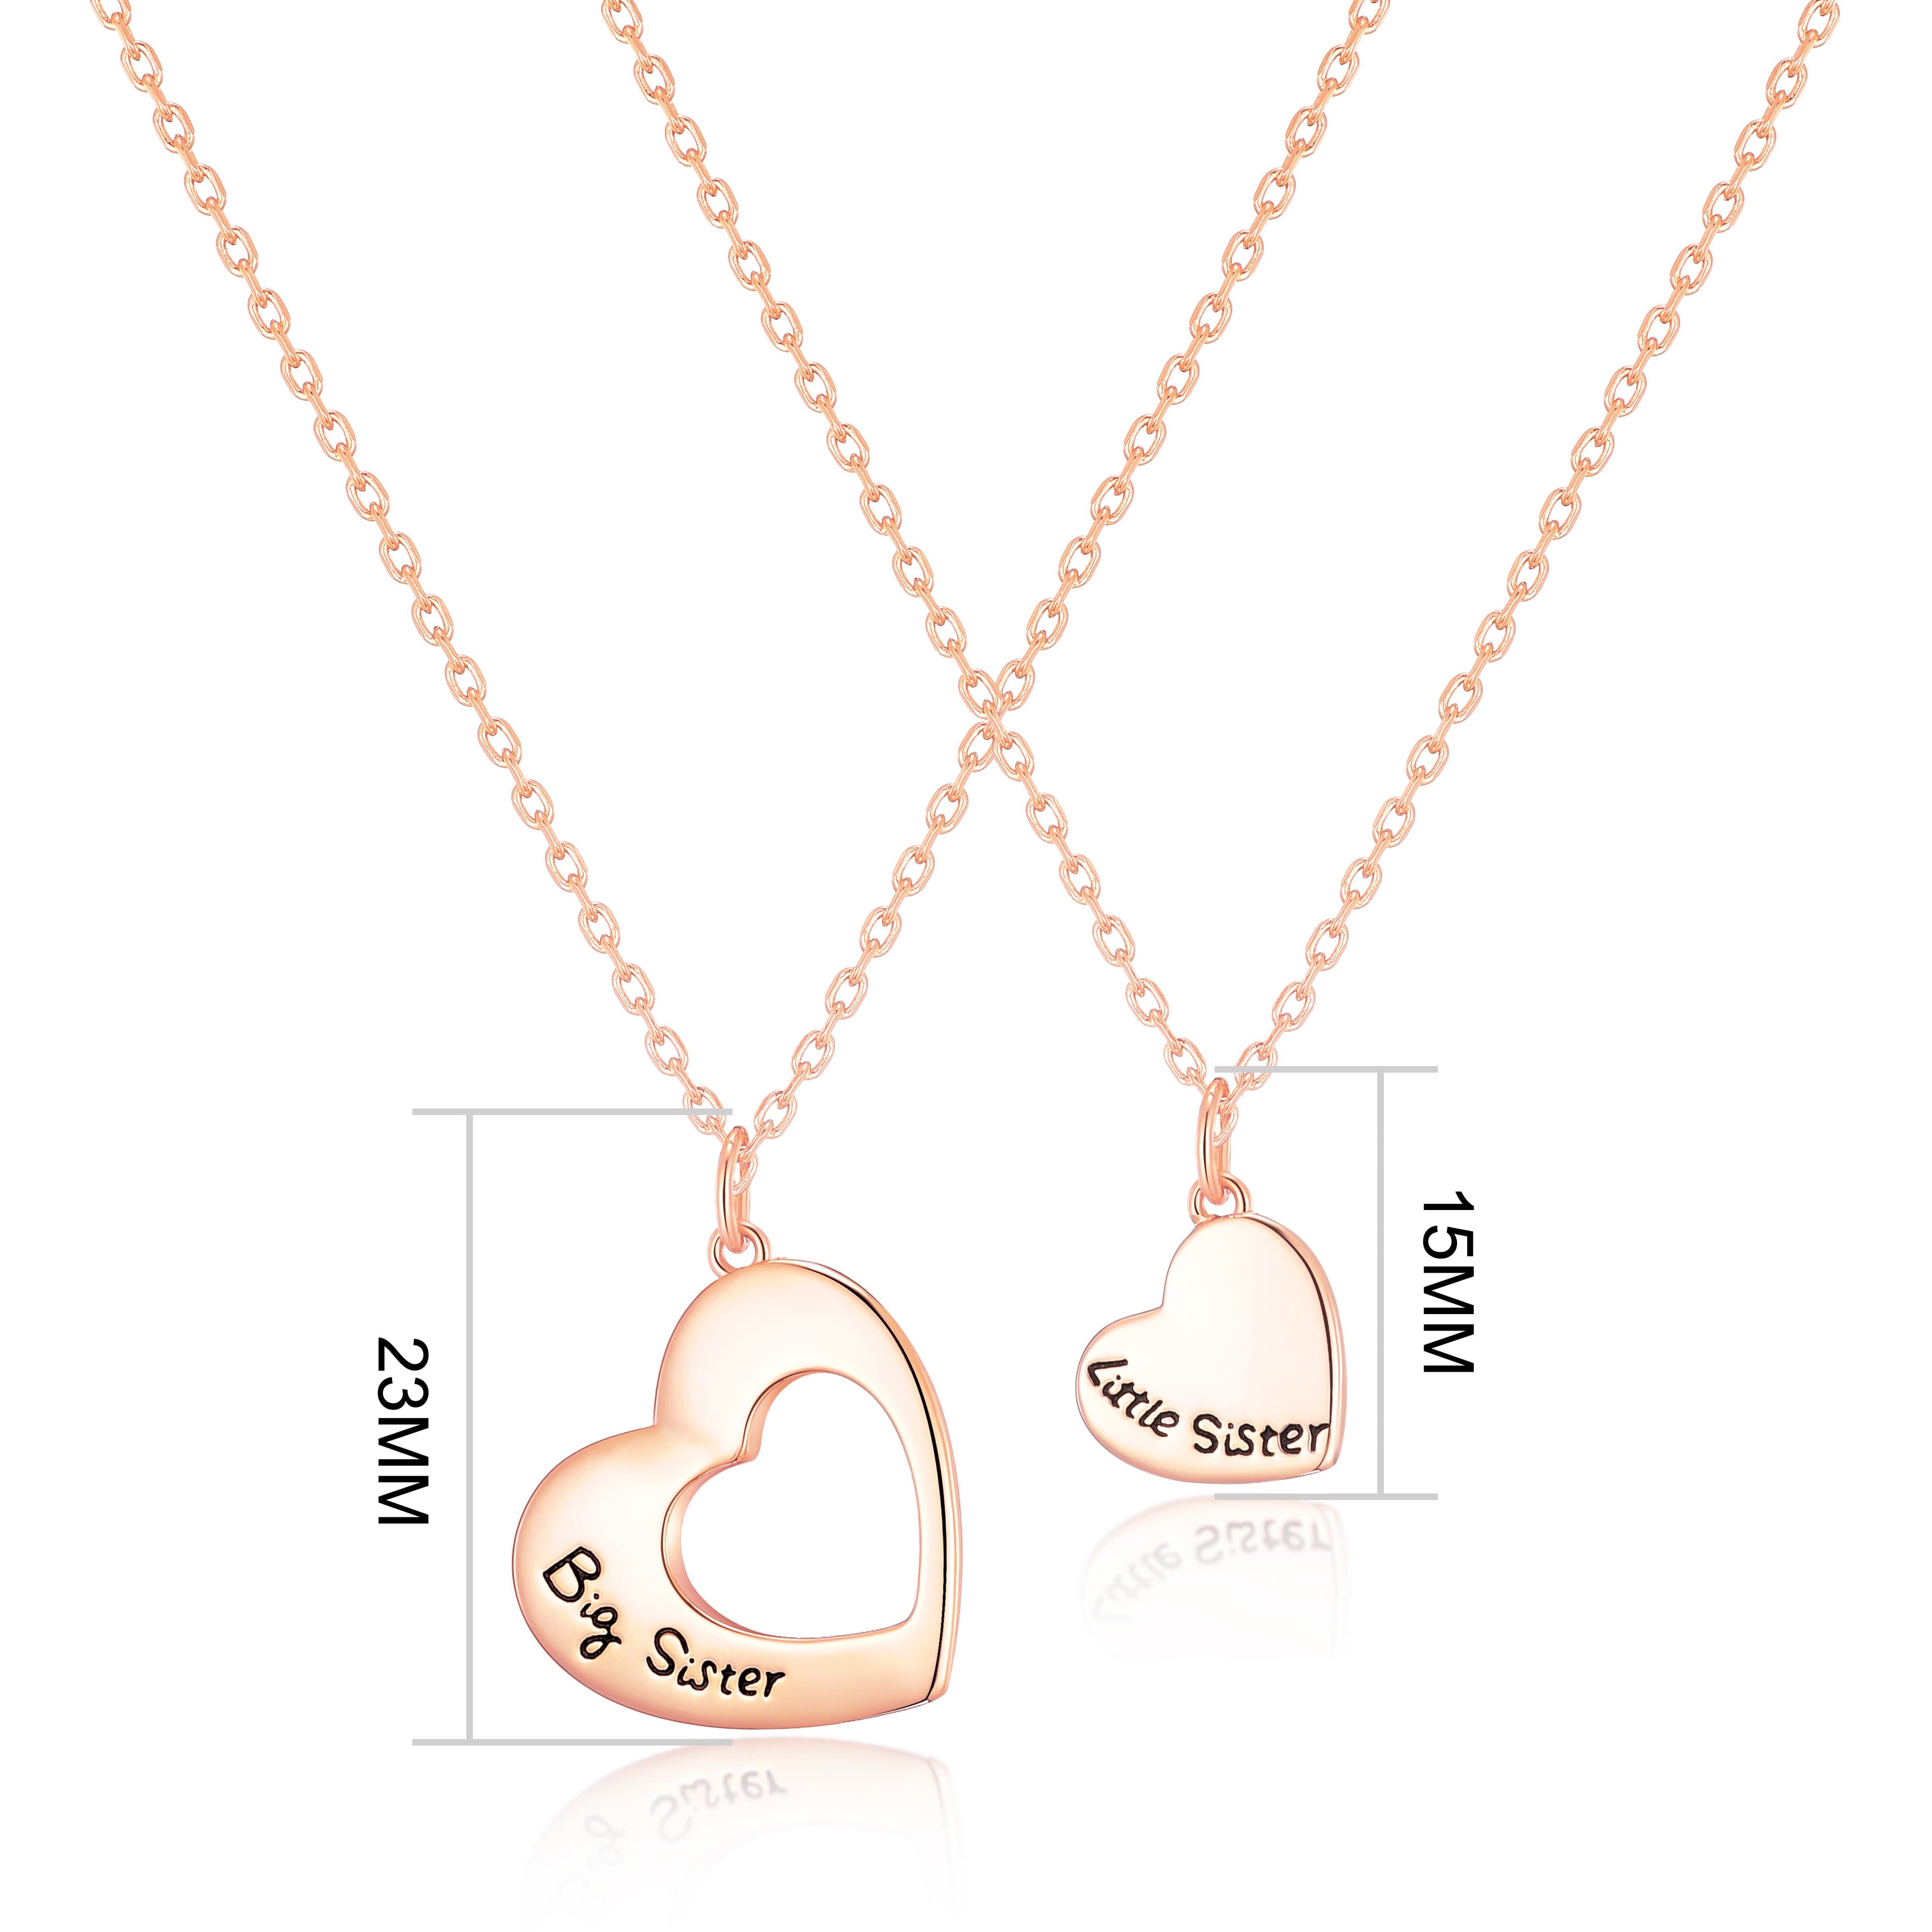 YONGHUI 3 PCS Mom Big Little Sister Charm Adjustable Necklaces For Women  Girls Rhinestone Love Heart Pendant Family Necklace Set Jewellery Gifts  Stainless Steel Silver | OutfitOcean Australia